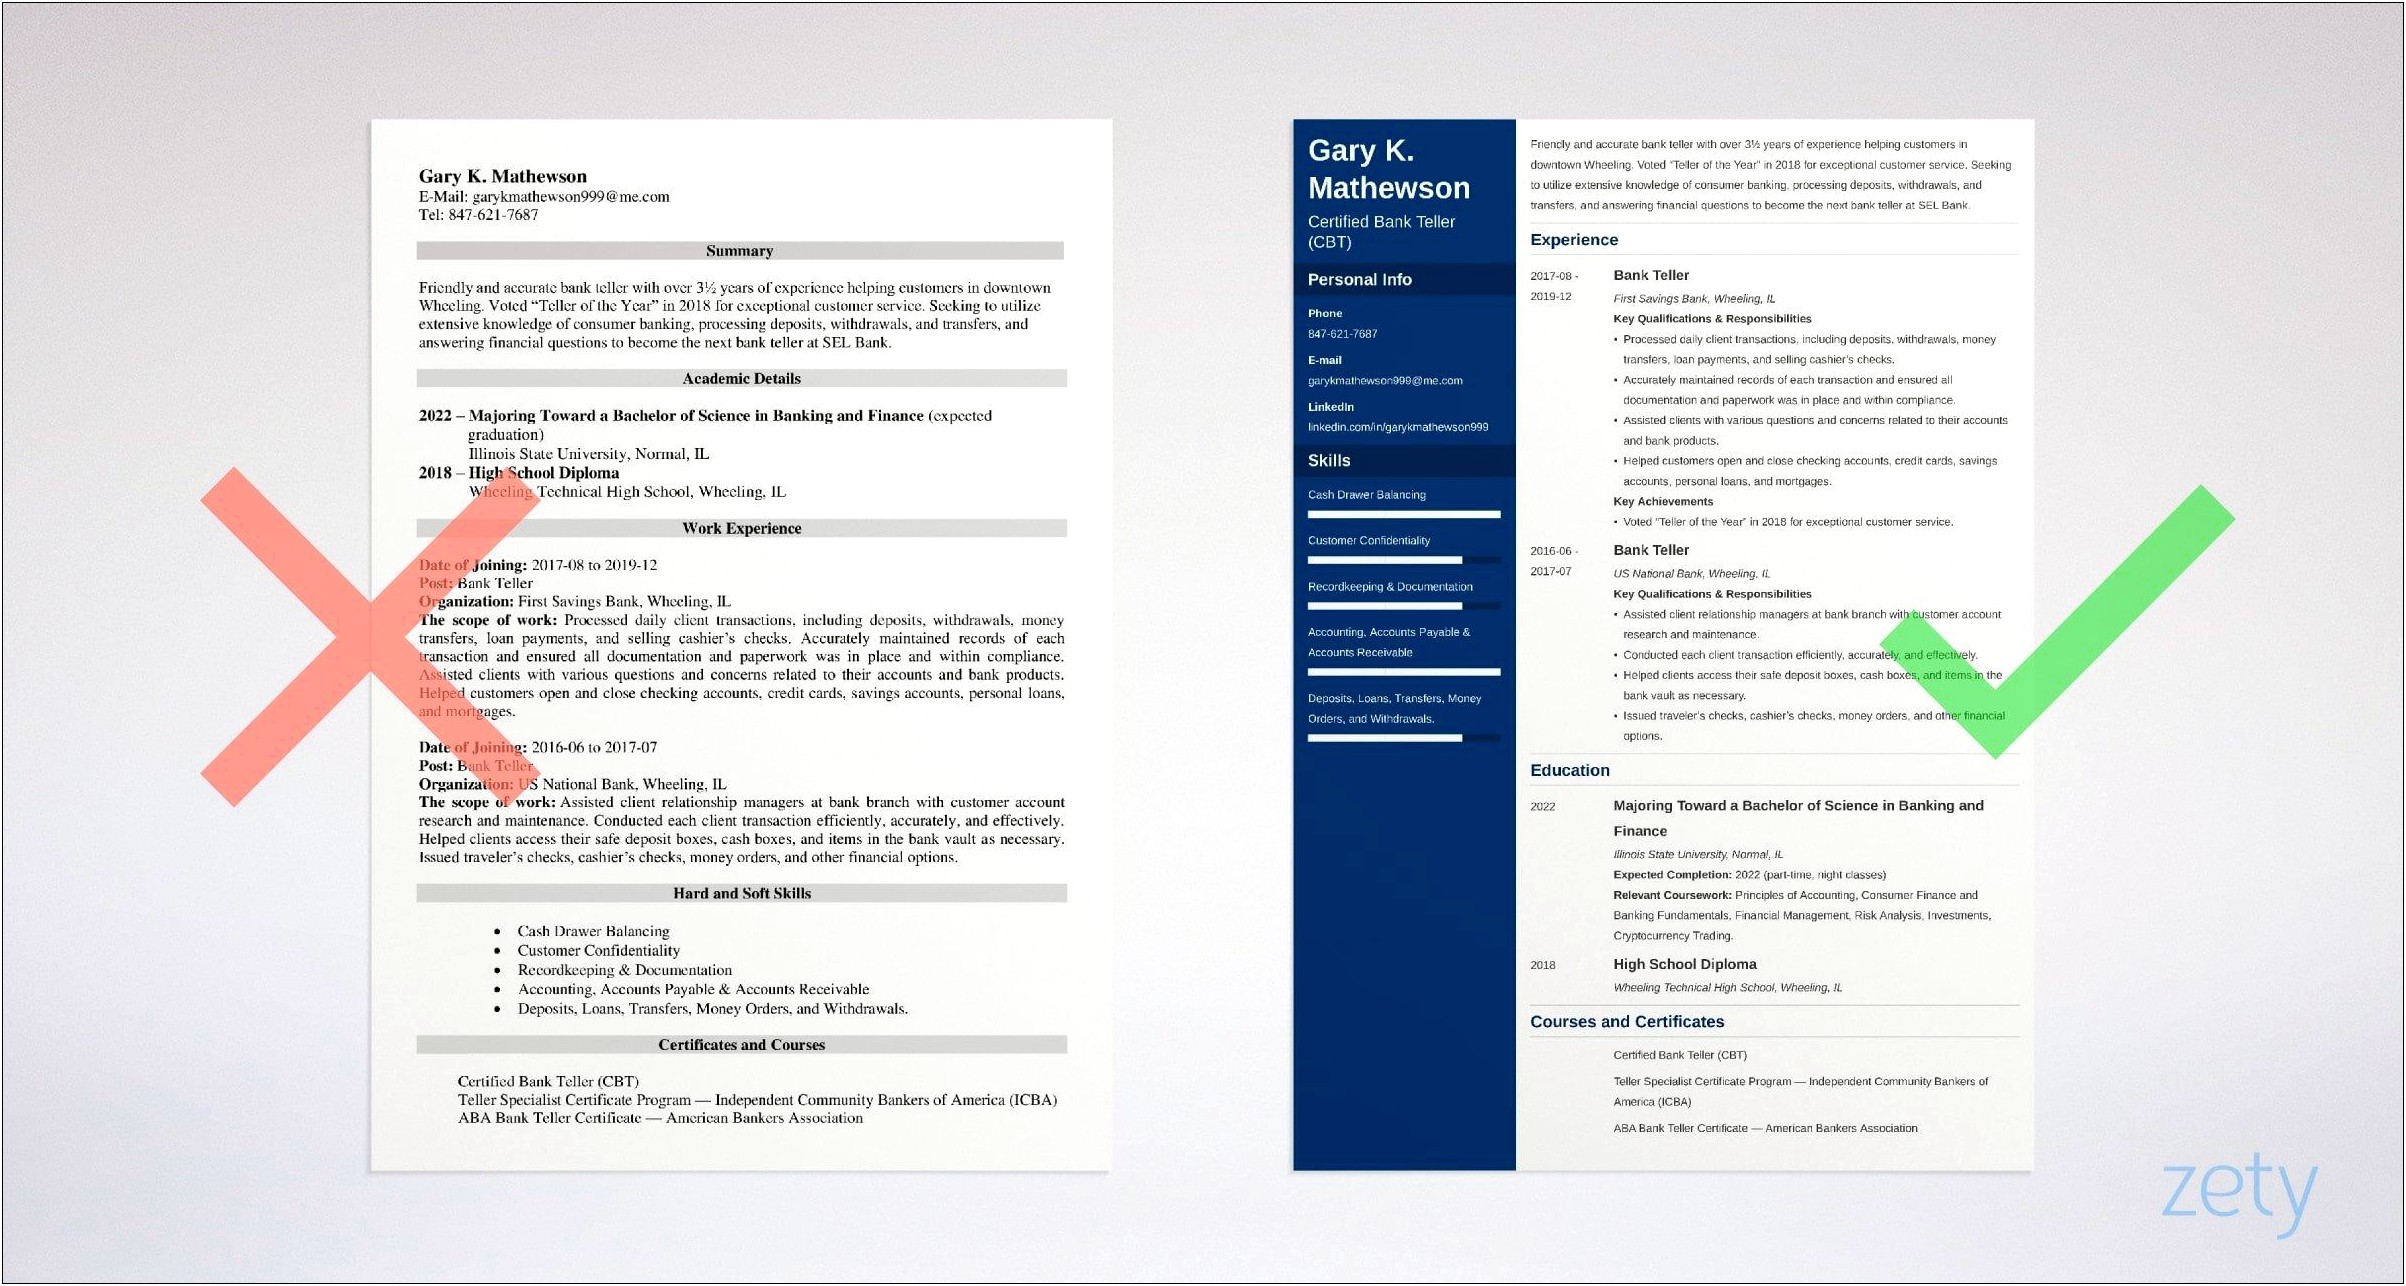 Resume Title Examples For Bank Teller